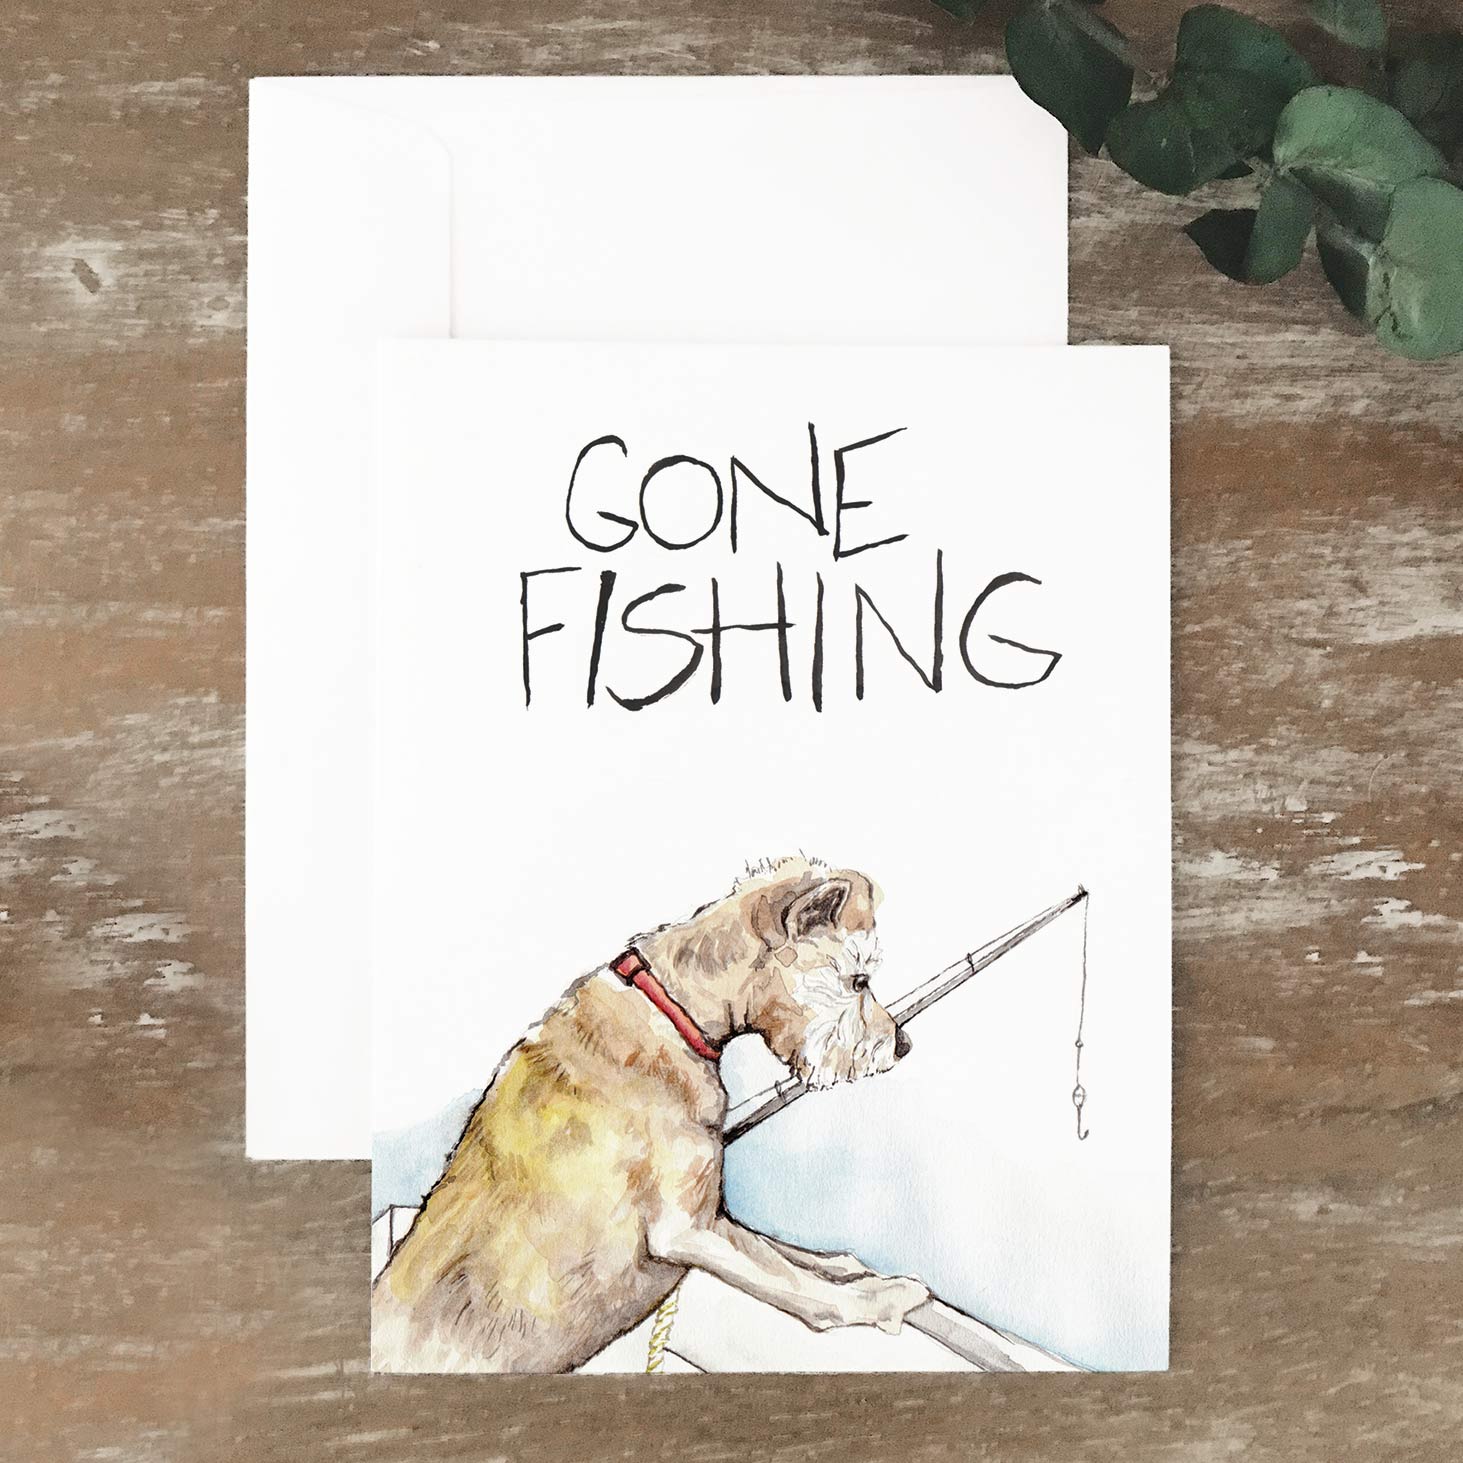 Gone Fishing - Abby Nurre Watercolor